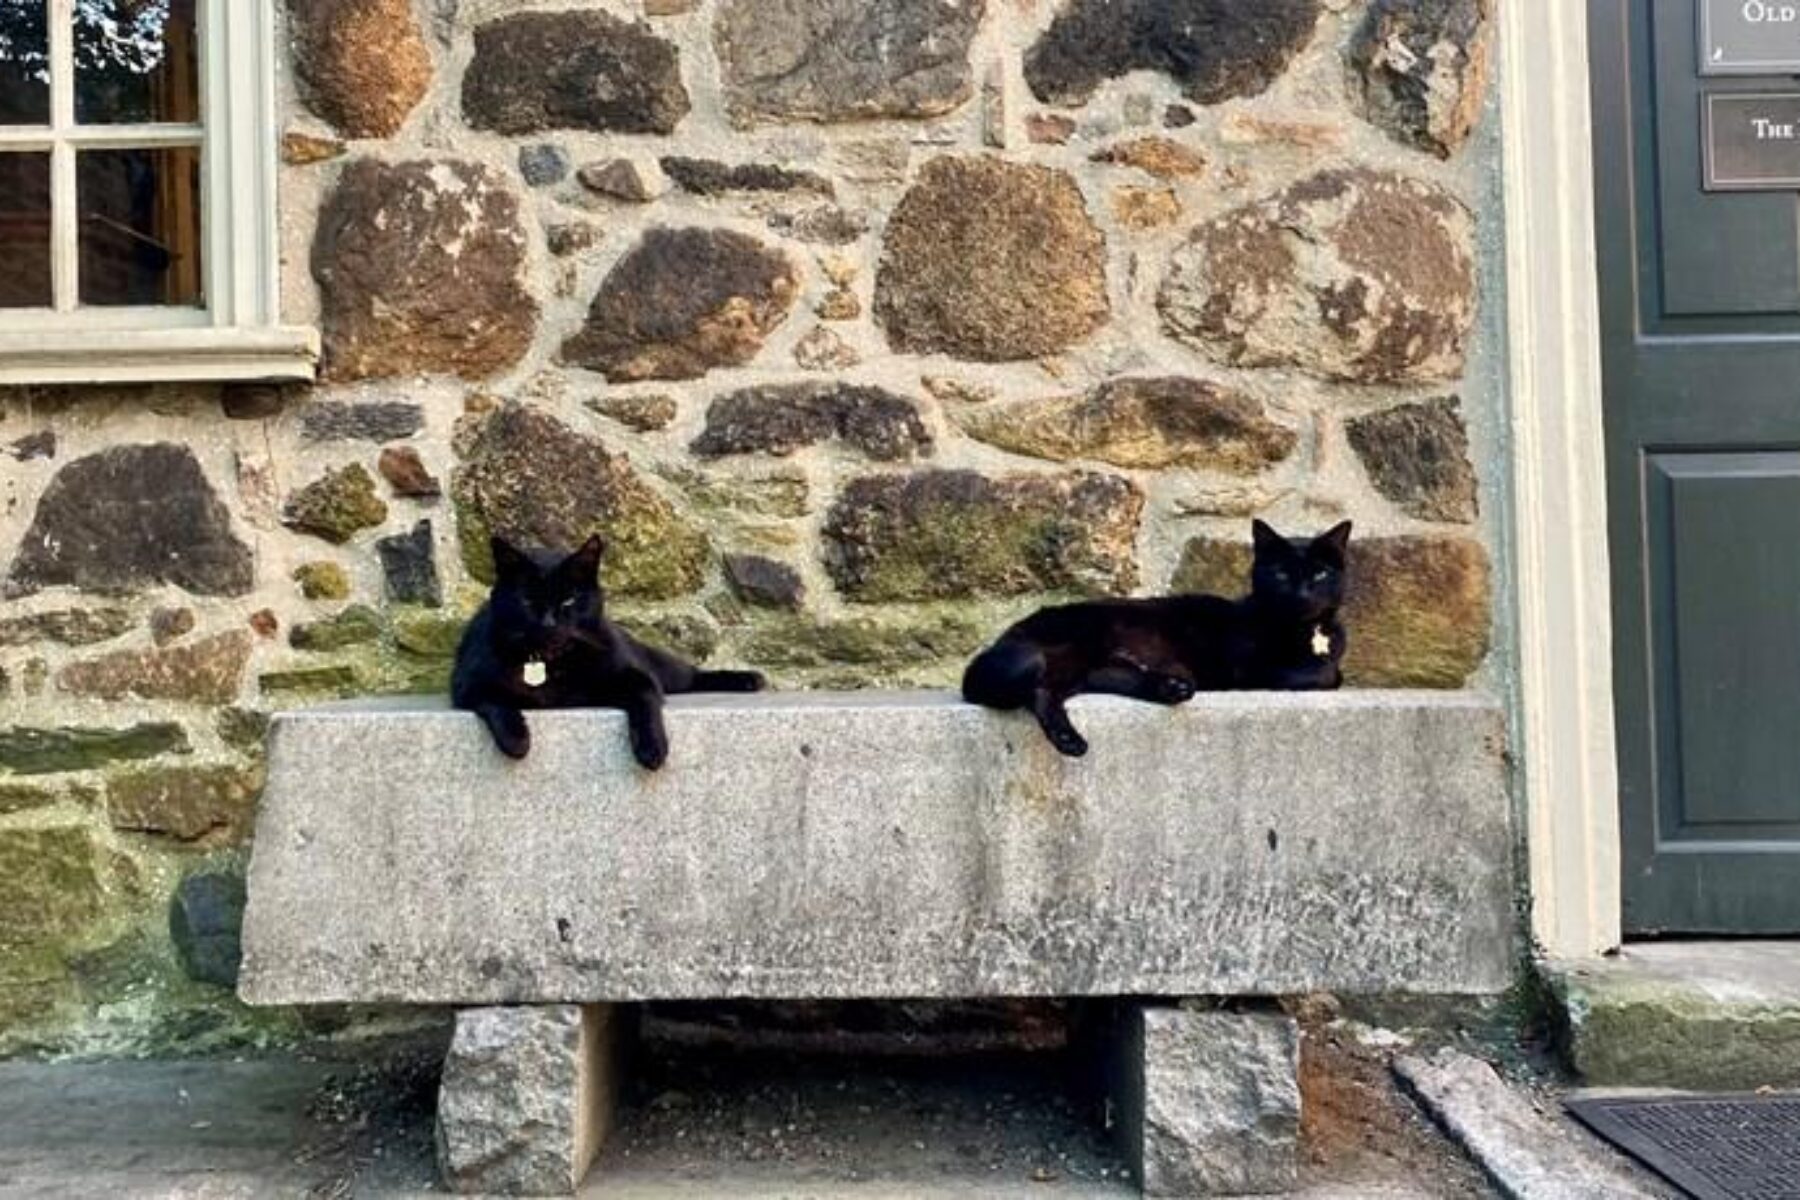 The Poe Museum and its famous kitty ambassadors, Edgar and Pluto, near the Virginia Capital Trail in Richmond | Photo courtesy The Poe Museum